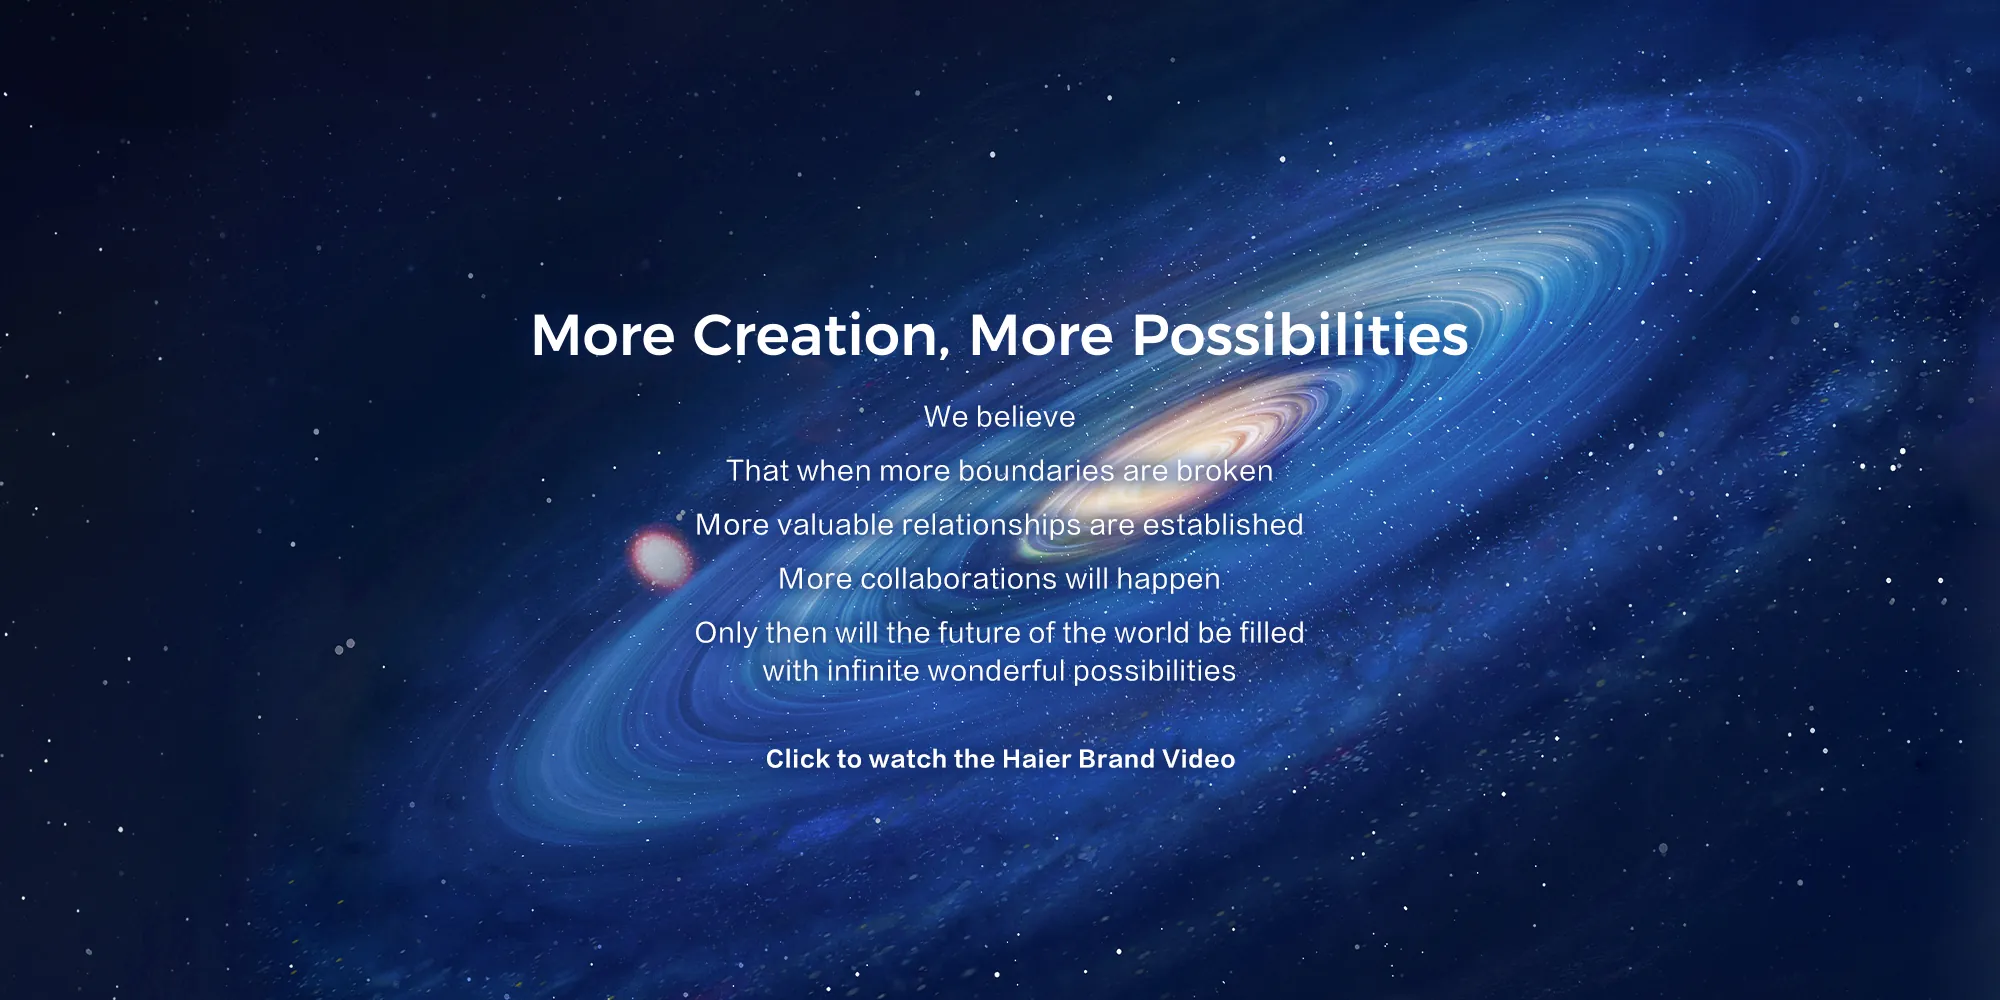 Haier Group - More Creation, More Possibilities